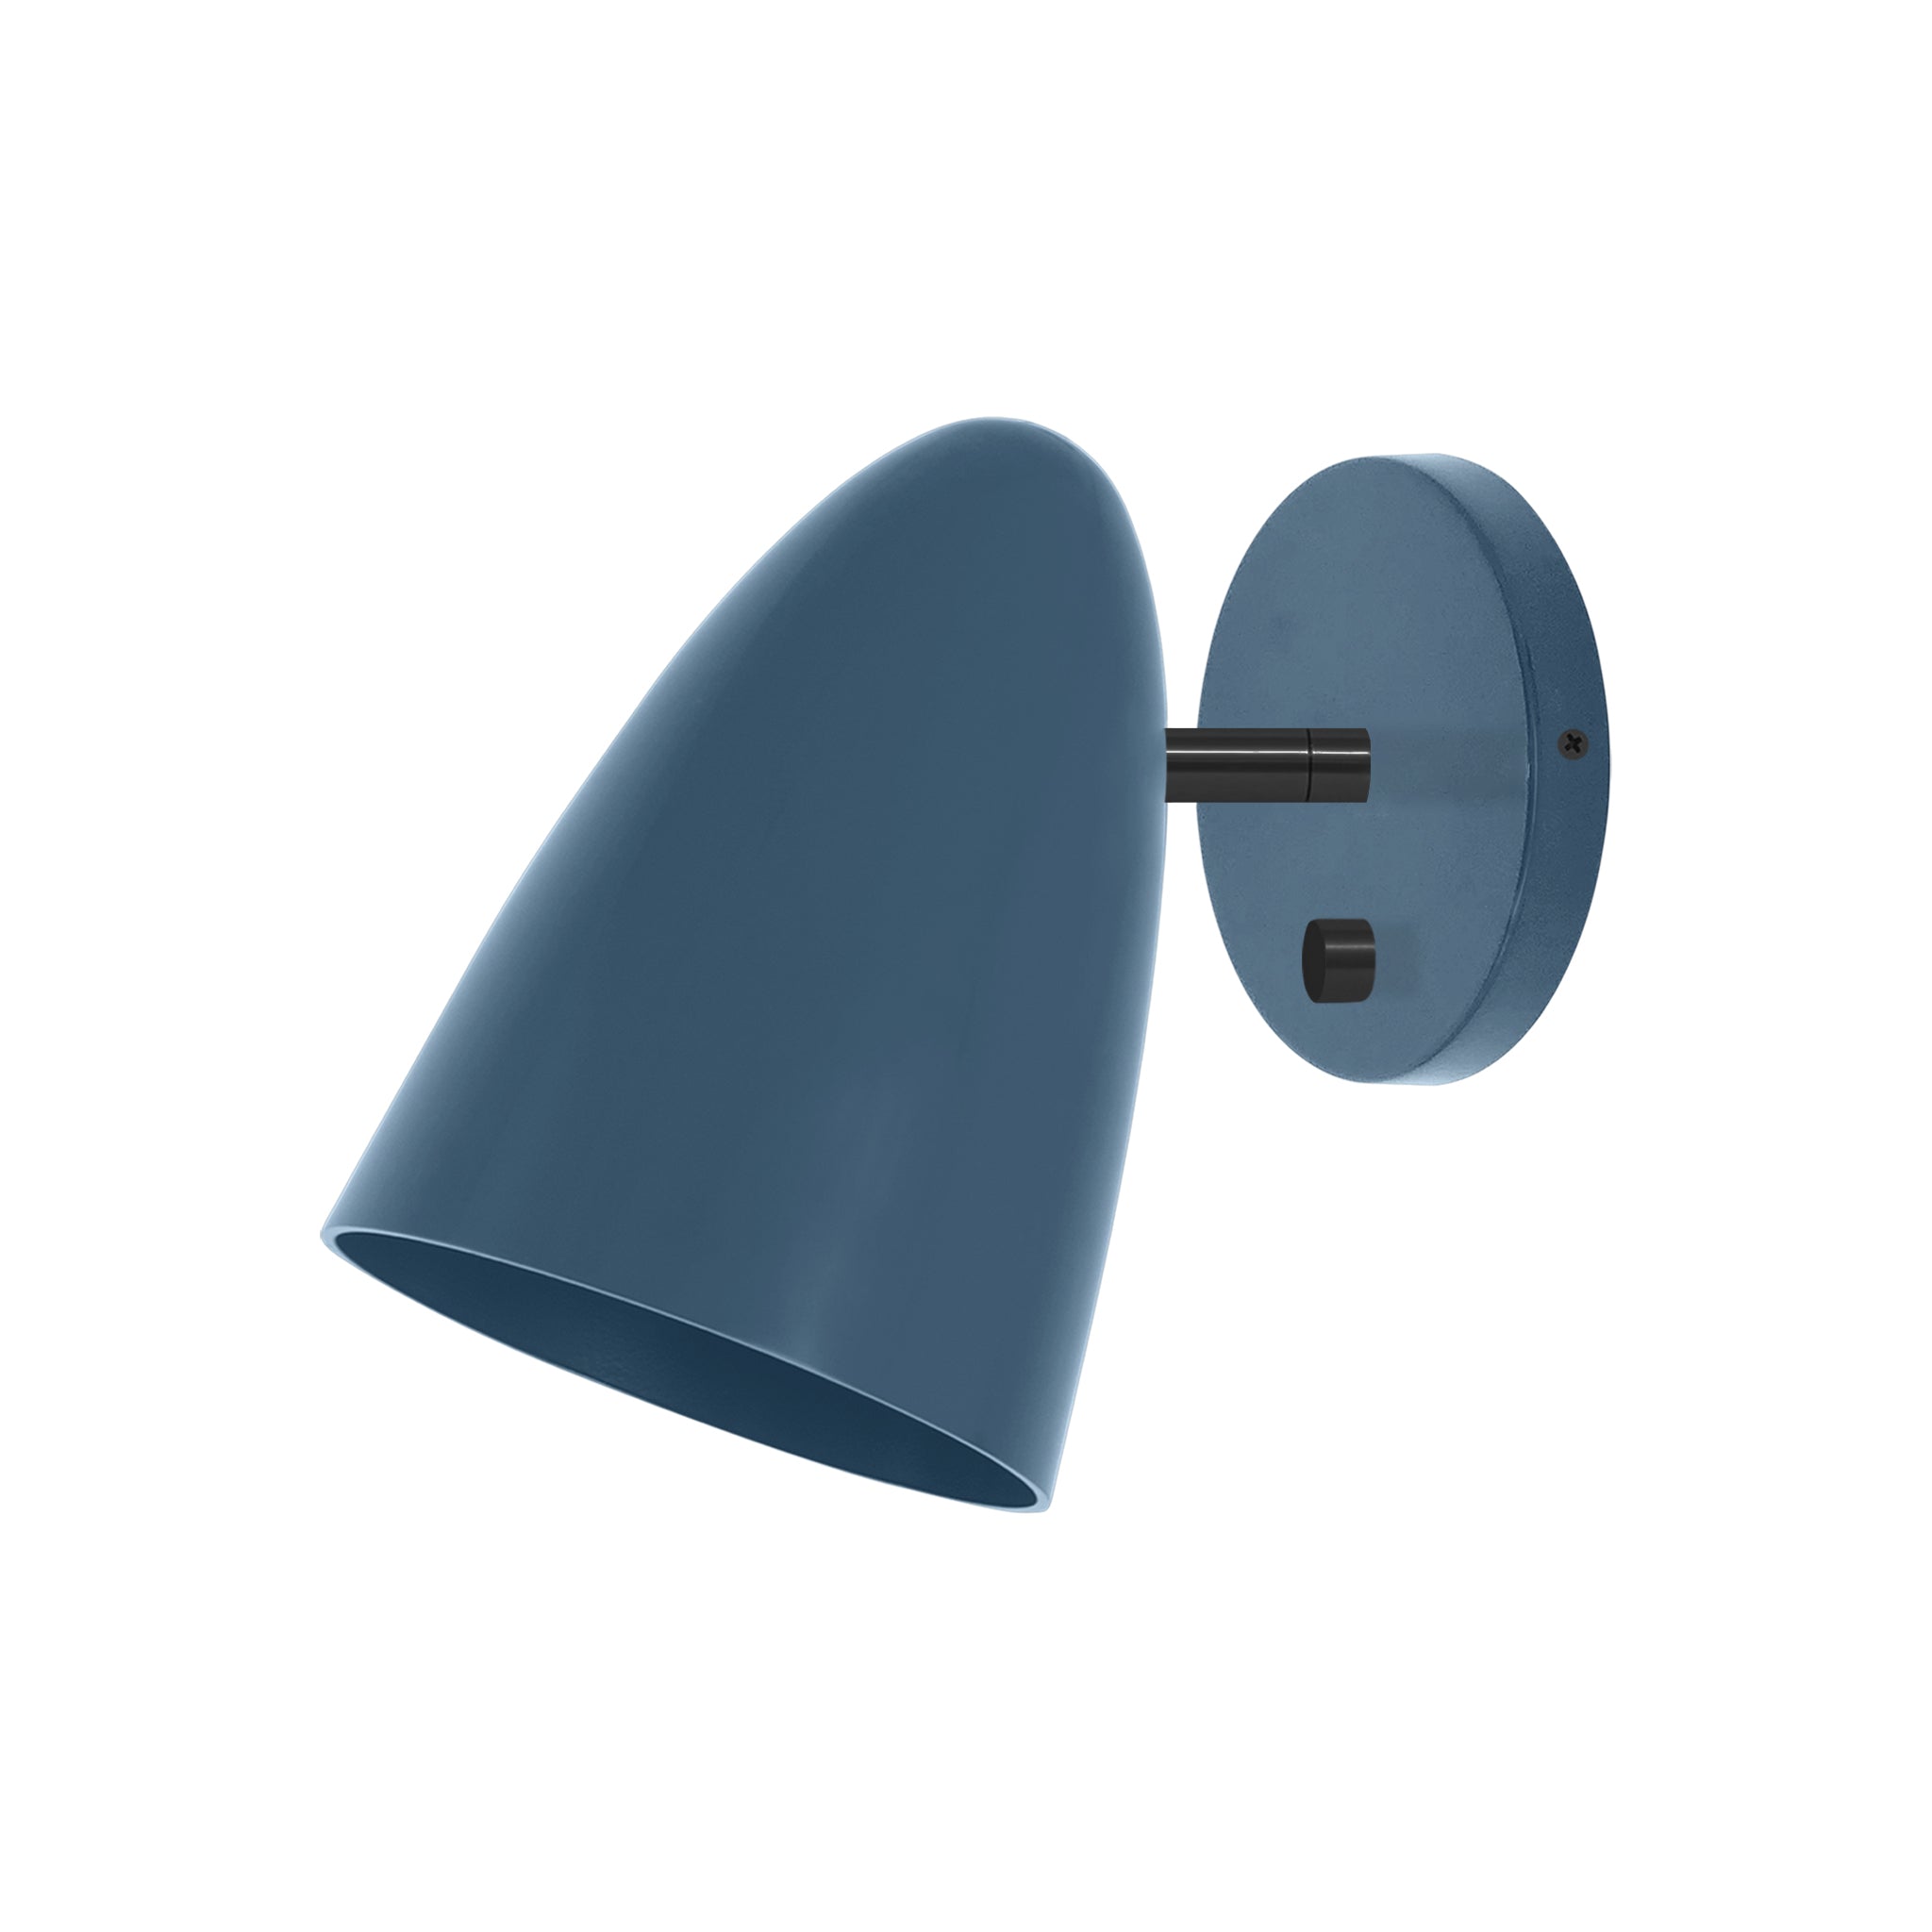 Black and slate blue color Boom sconce no arm Dutton Brown lighting